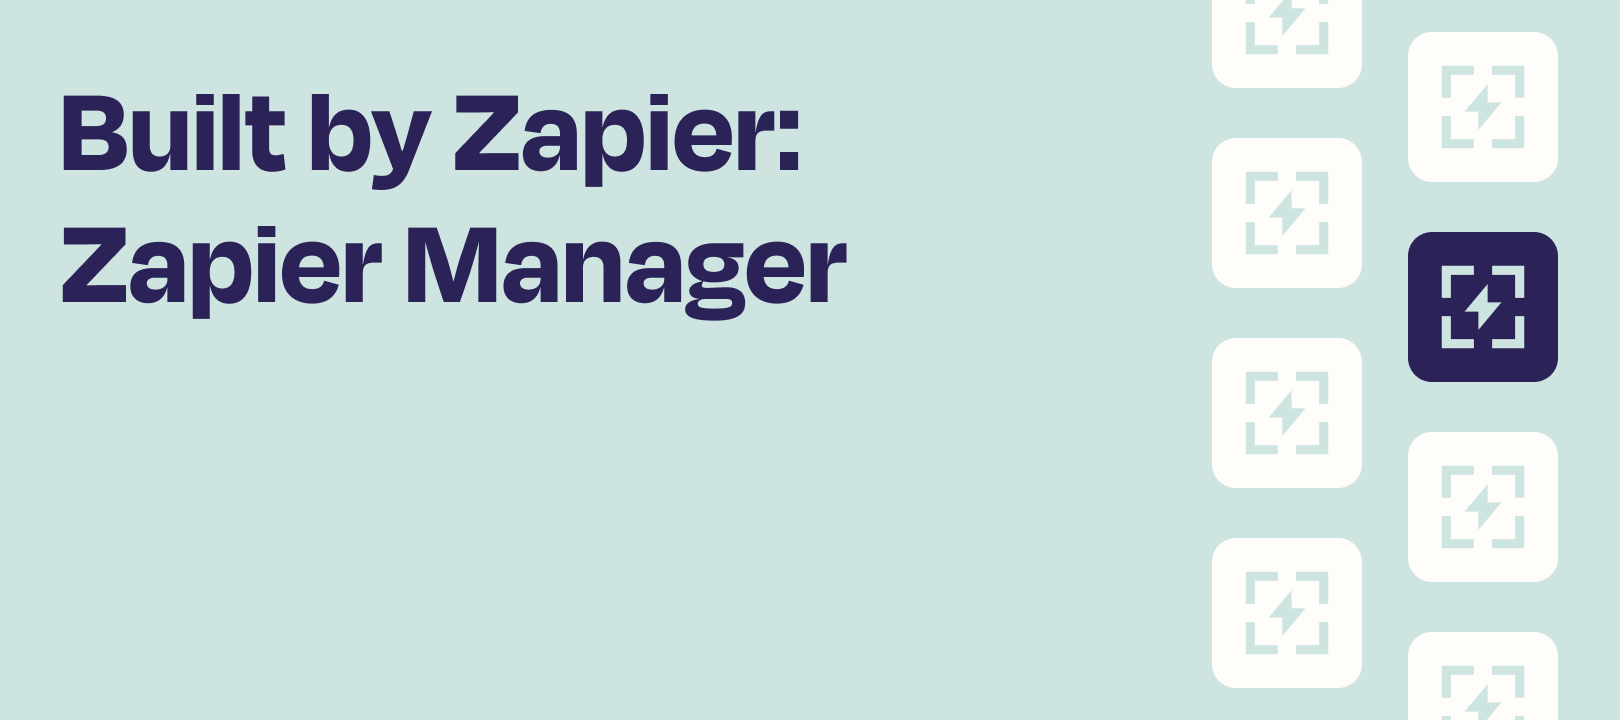 The Zapier Manager app: what the heck is it and what can it be used for?